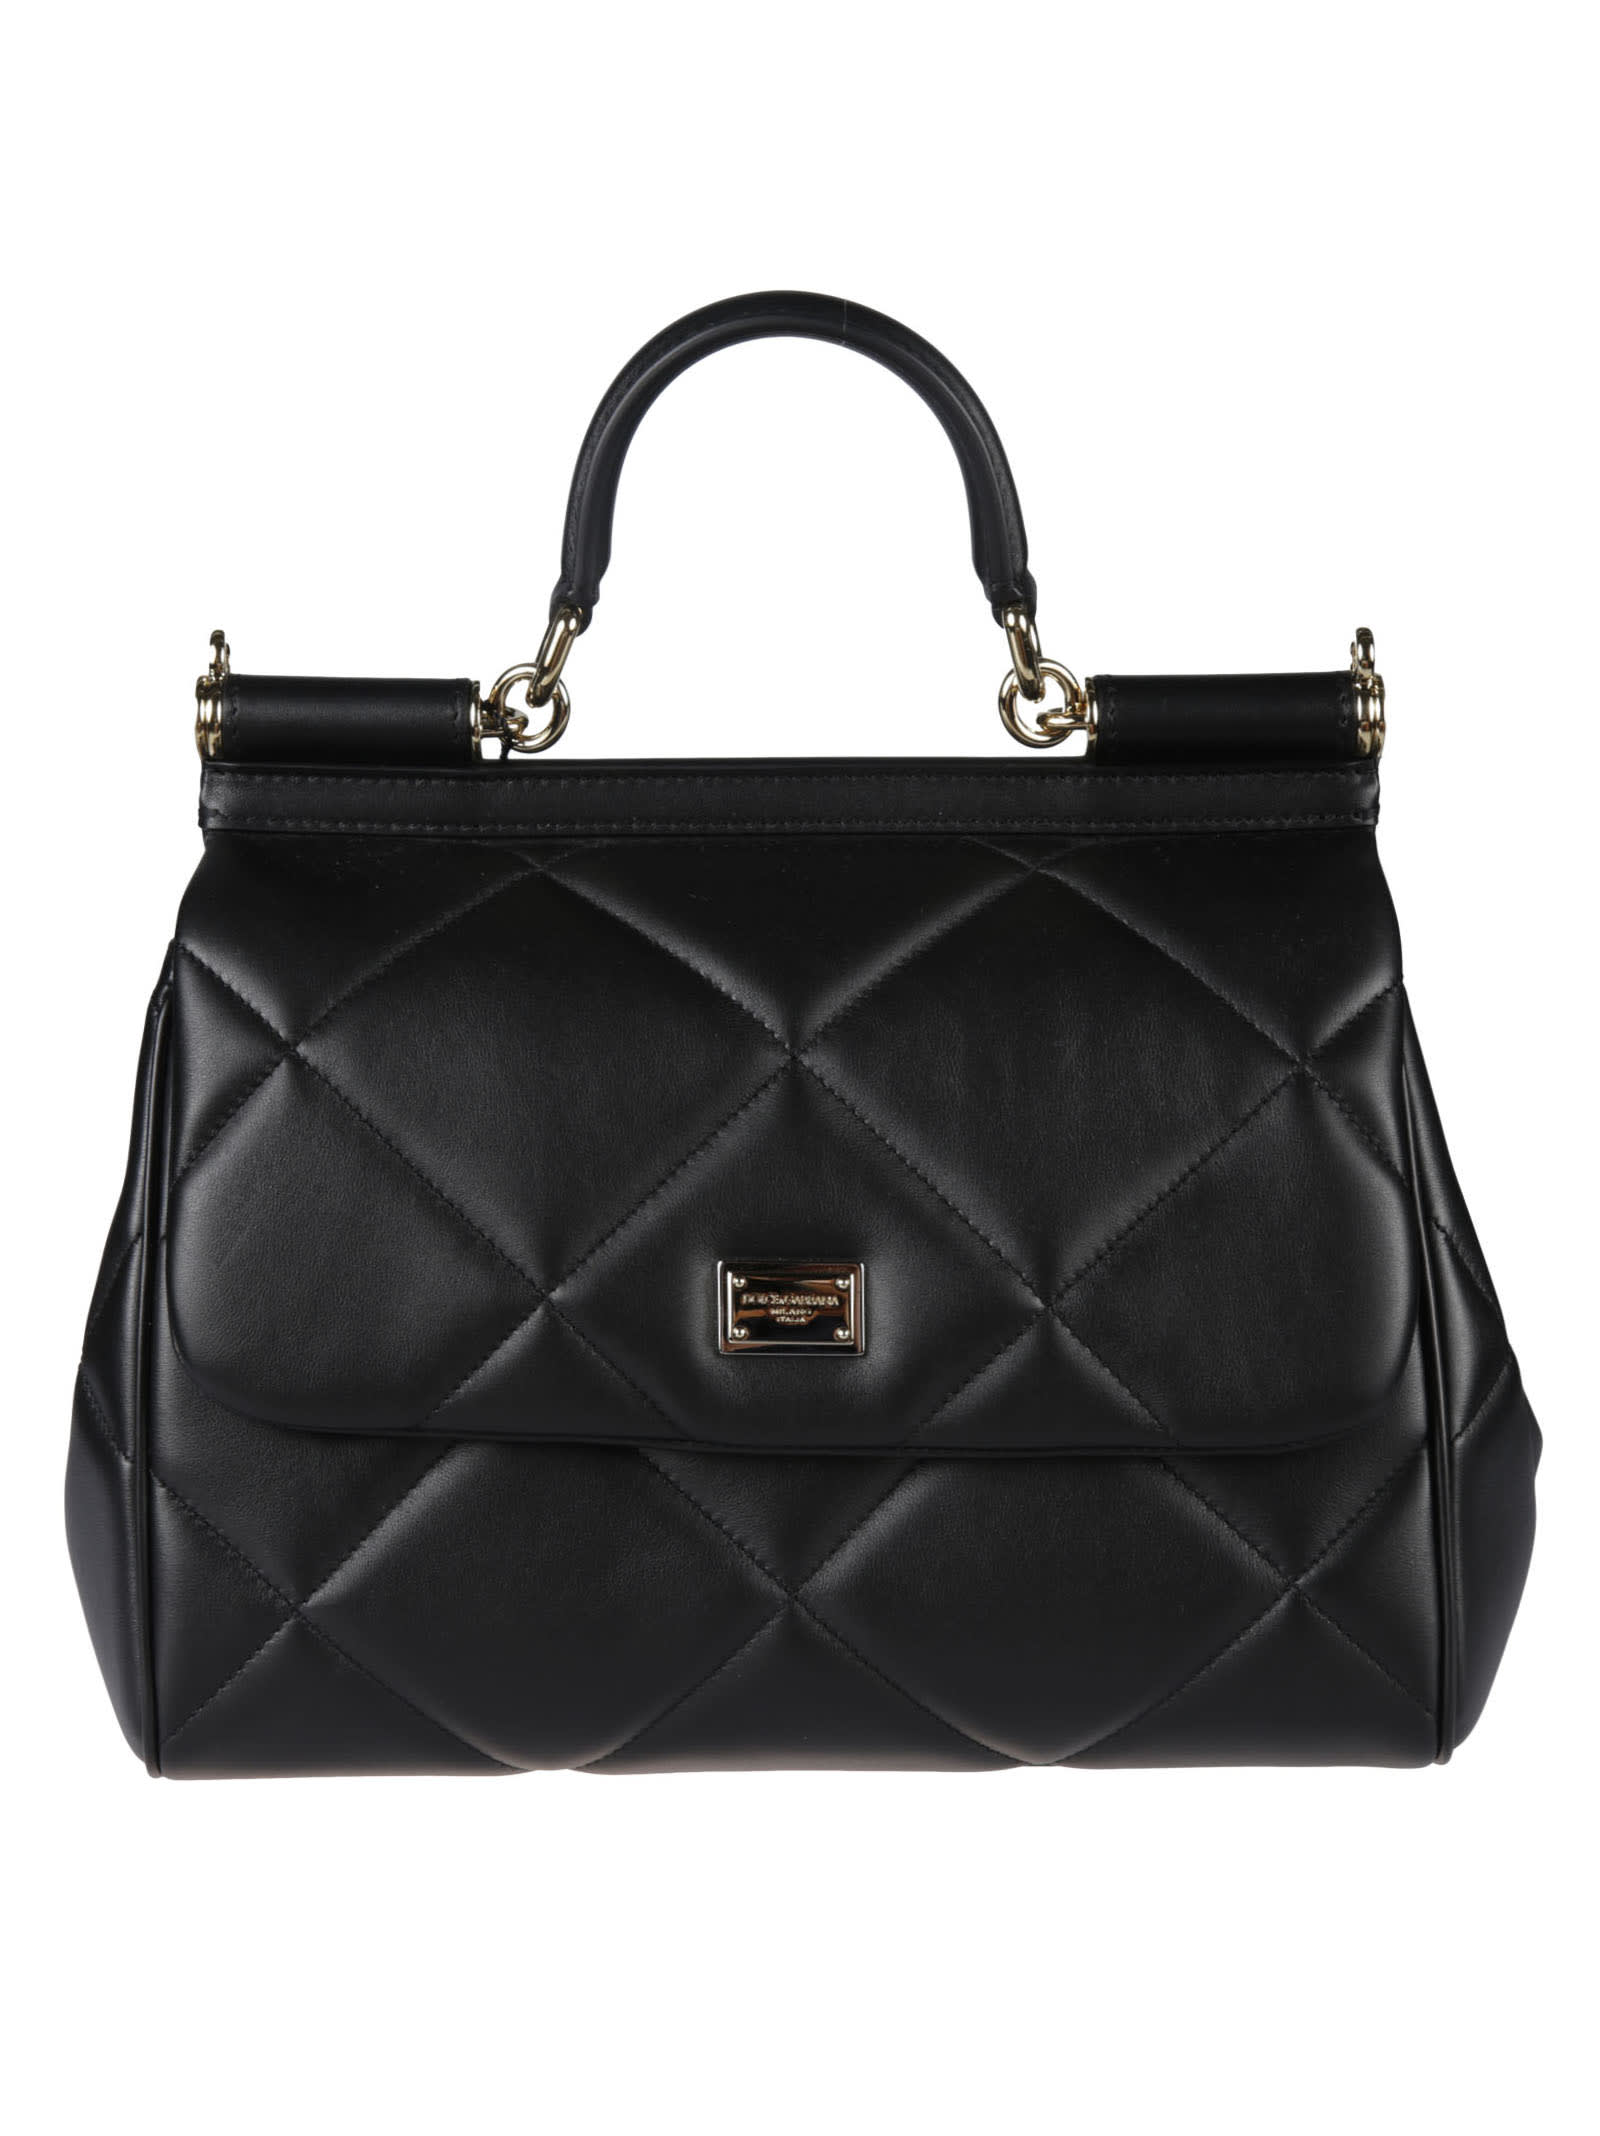 Dolce & Gabbana Quilted Sicily Tote